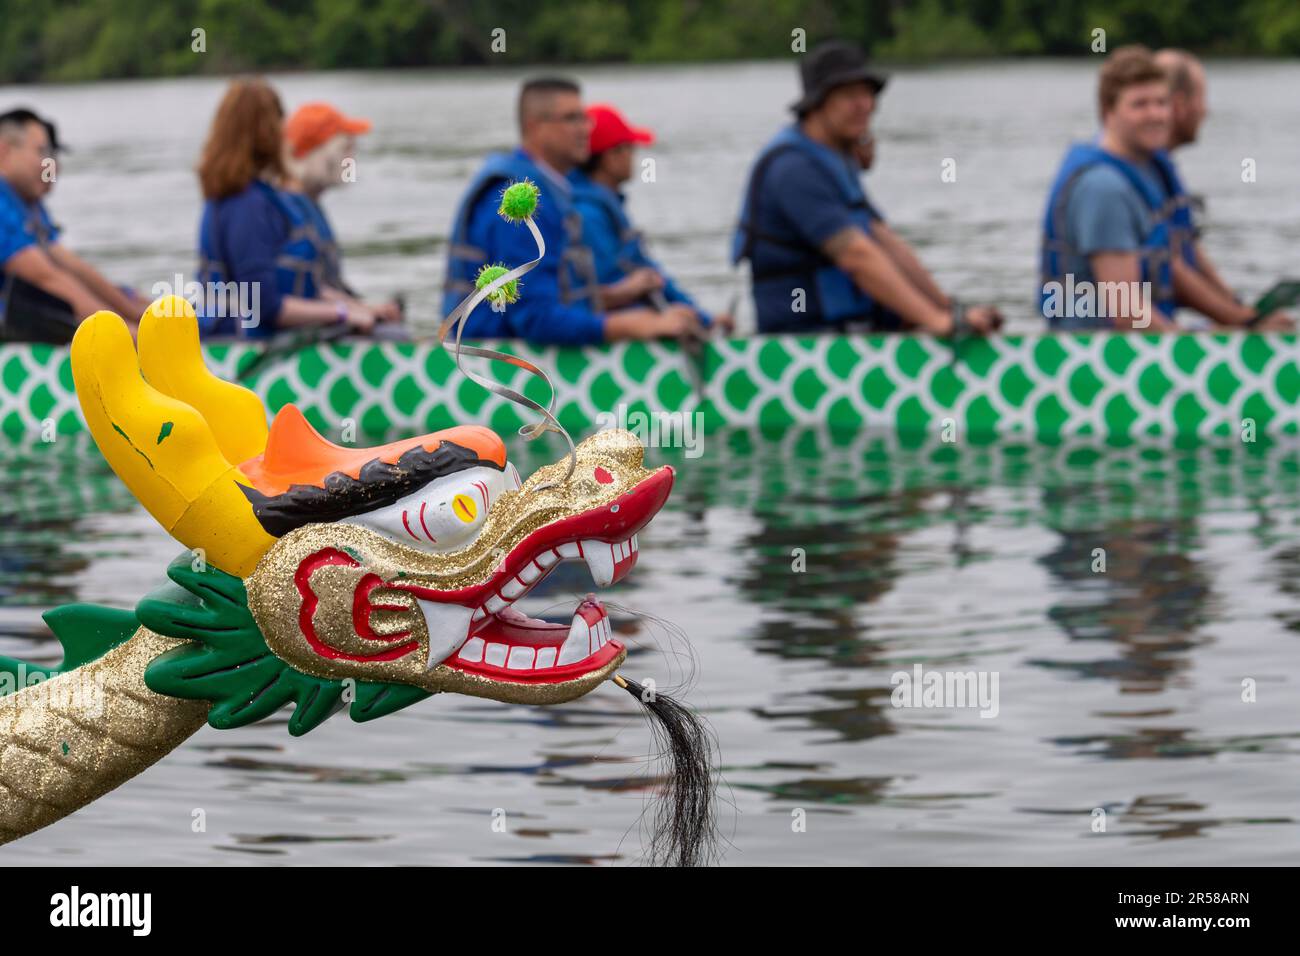 Washington, DC - The DC Dragon Boat Festival on the Potomac River. Dragon boating is a 2300-year-old Chinese tradition. The Washington festival has be Stock Photo